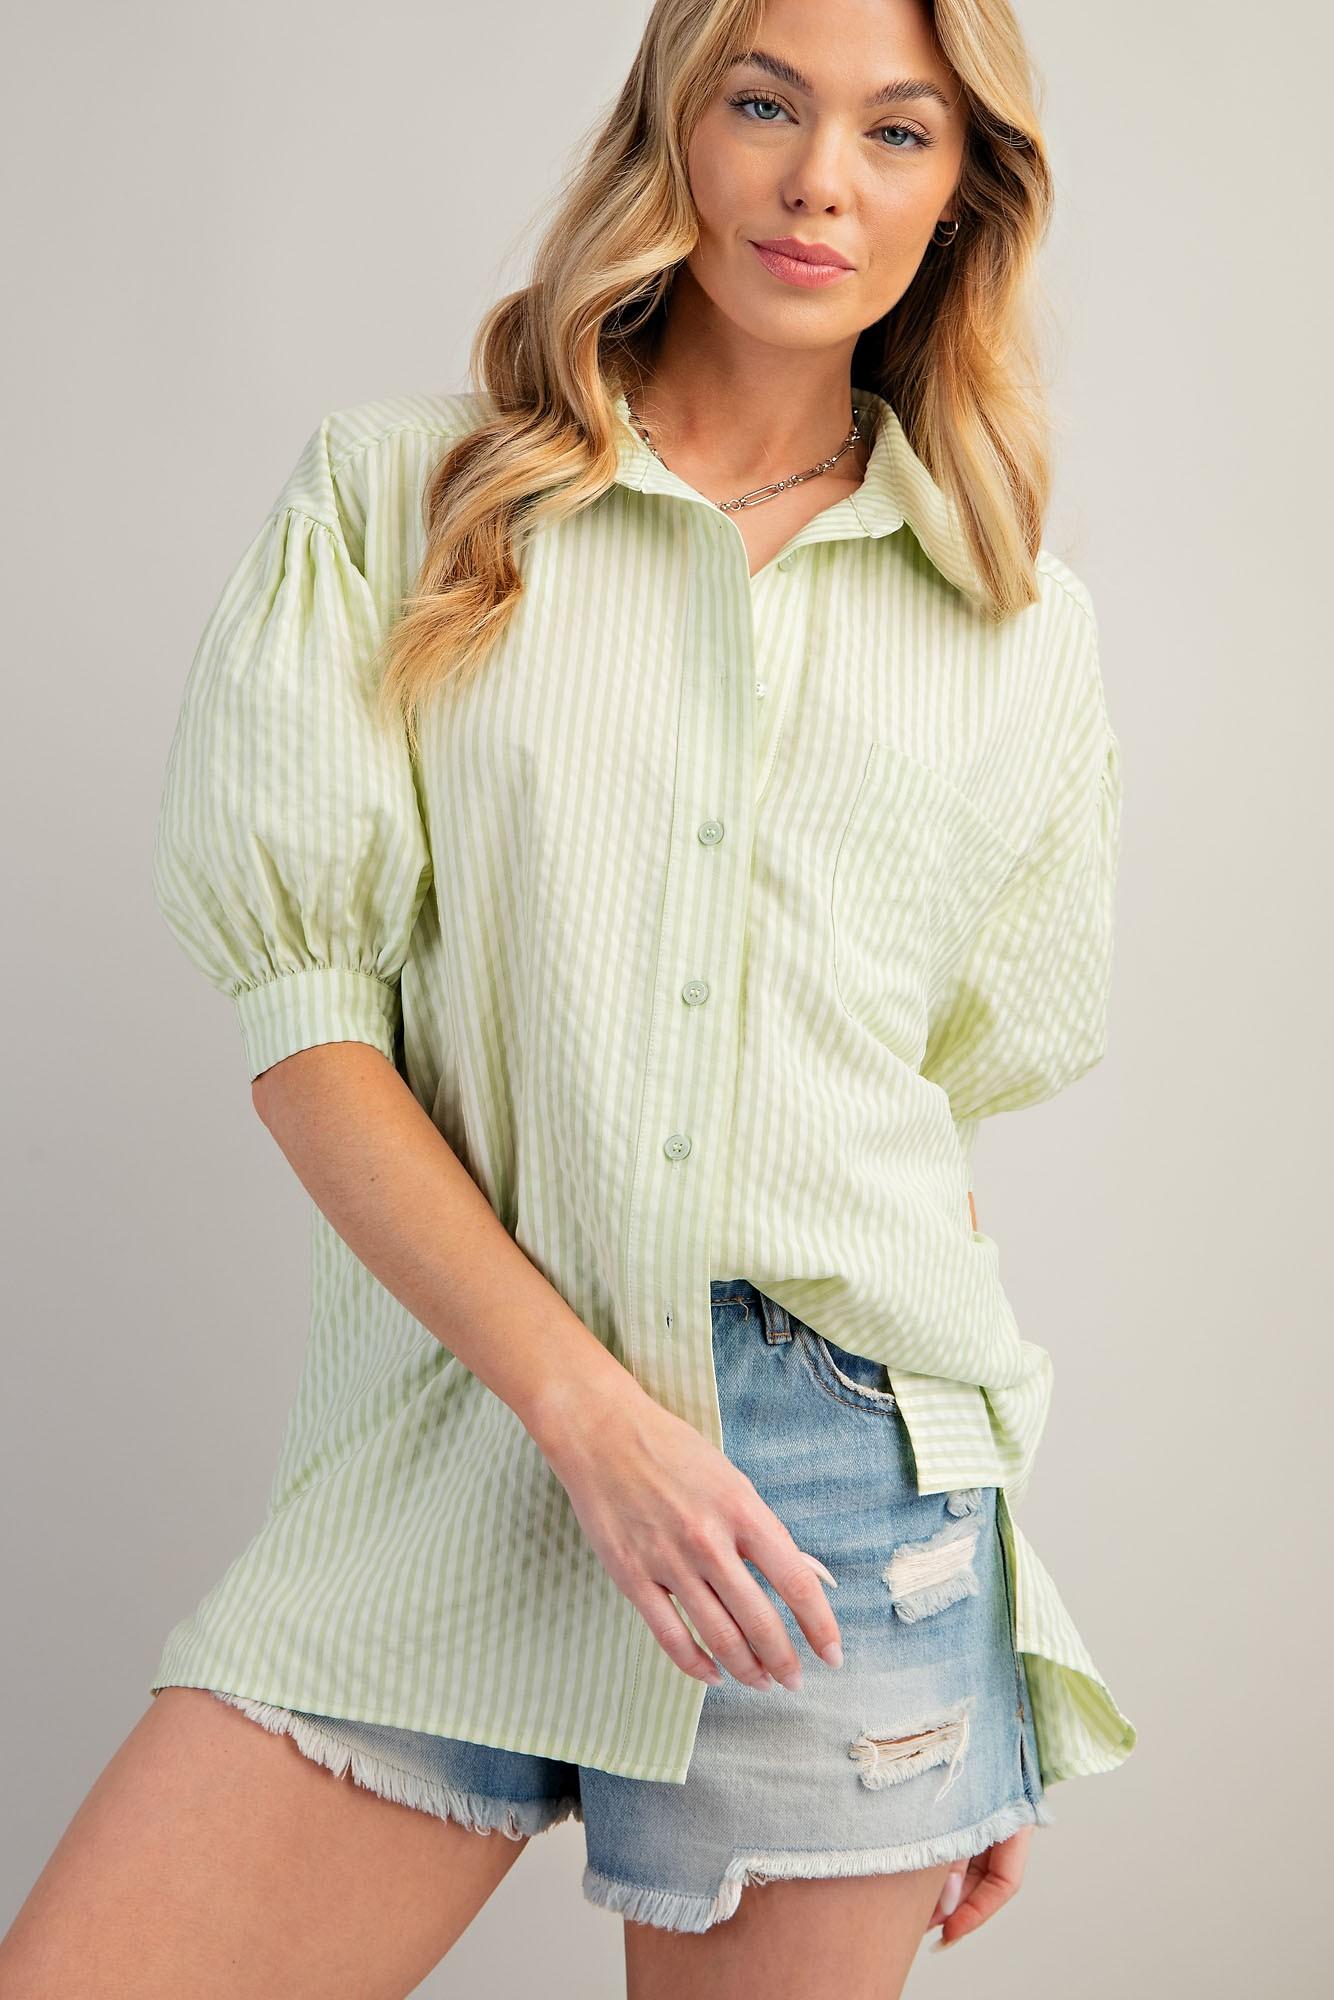 Here For You Short Sleeve Button Down